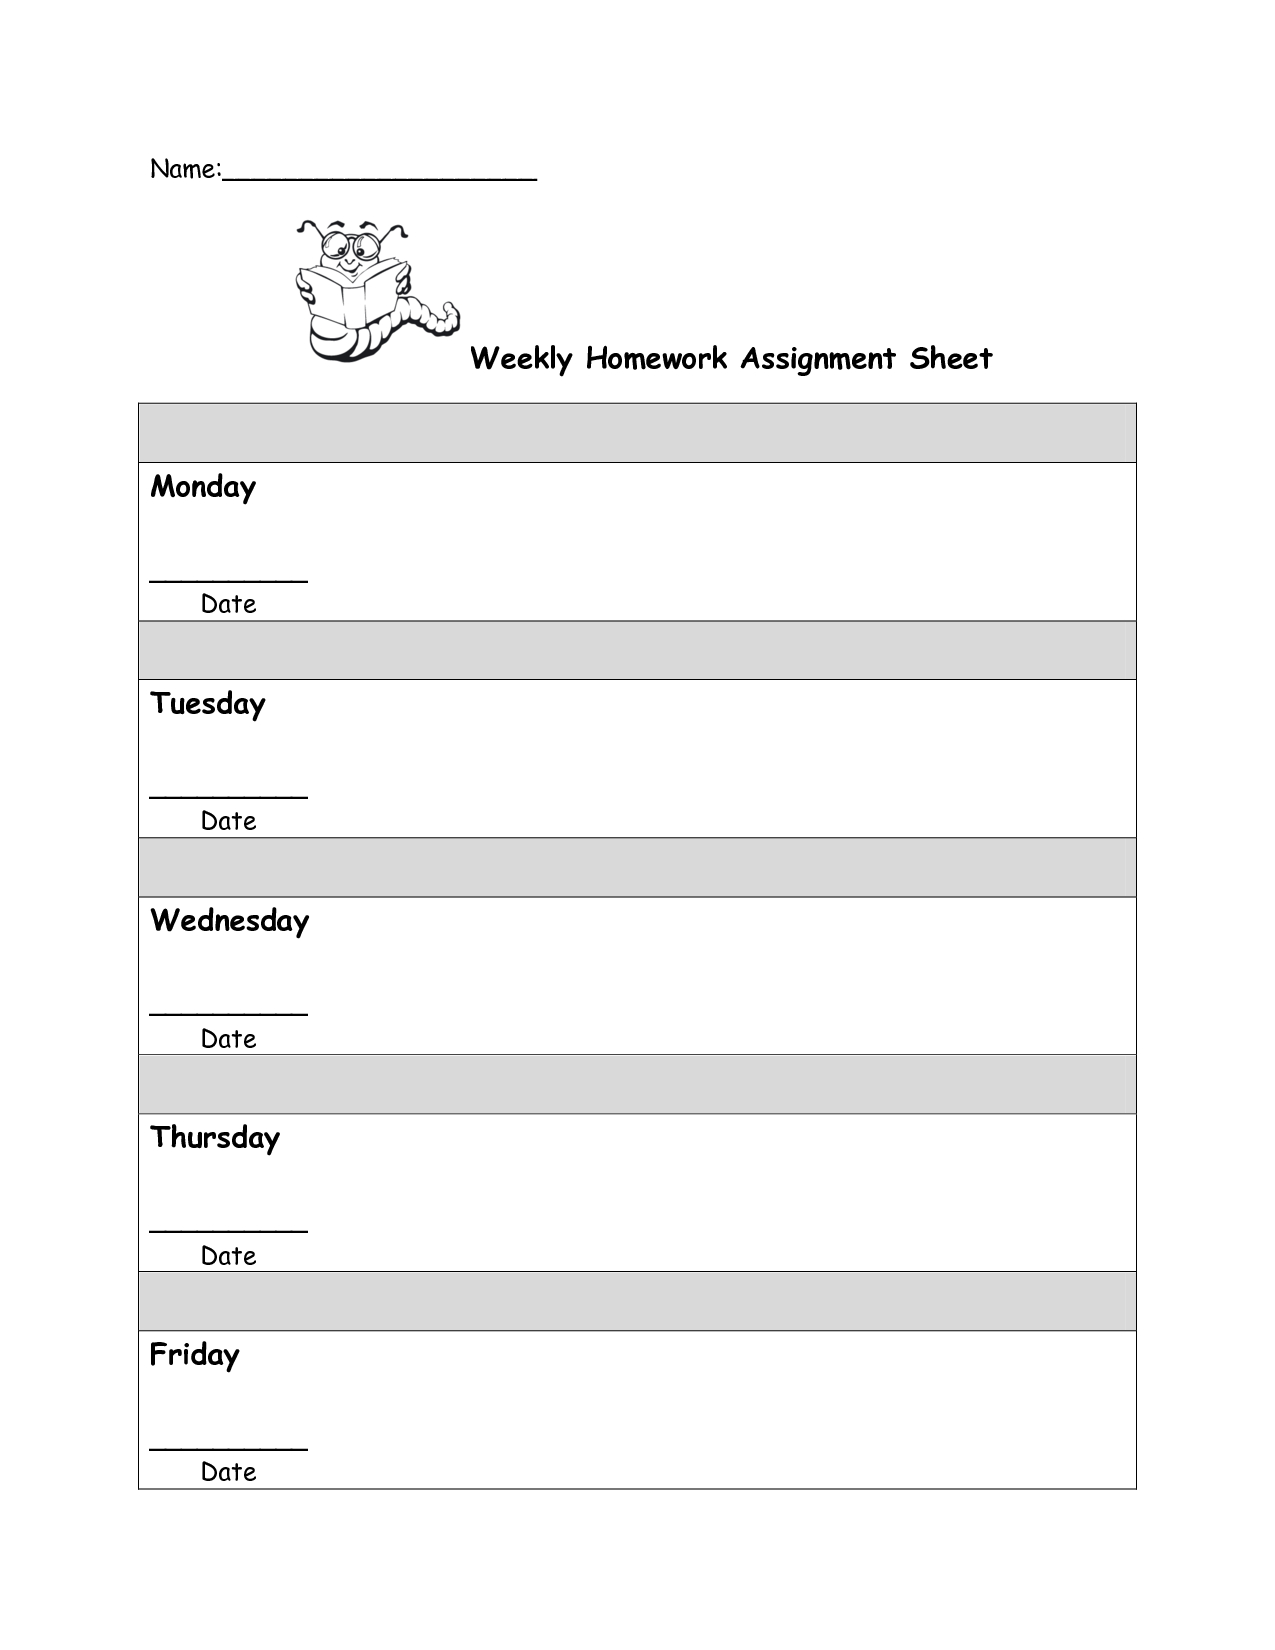 homework assignments or assignment